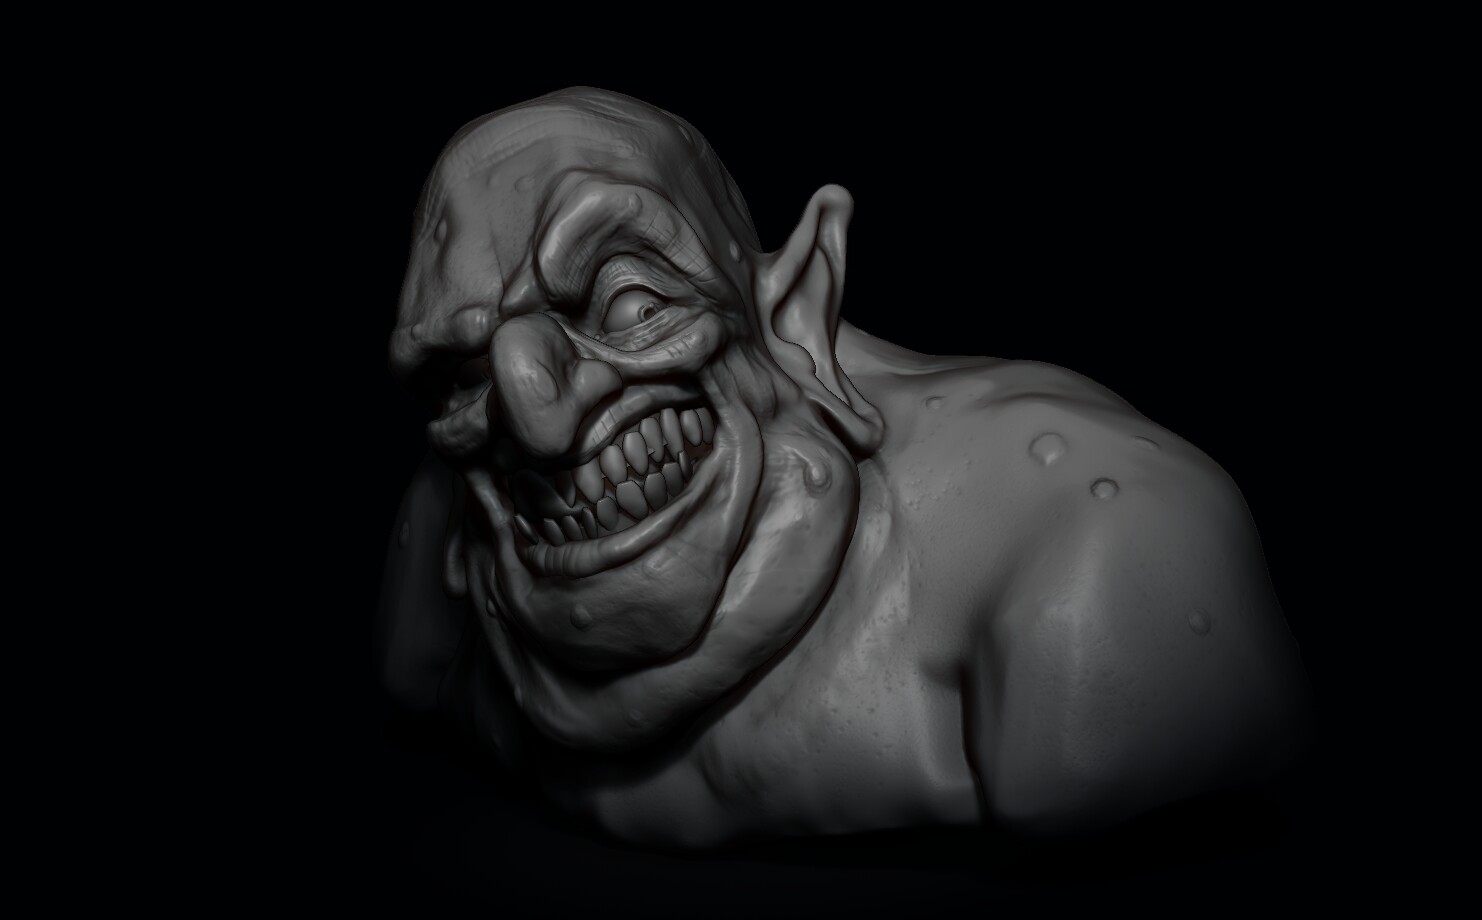 Early phase of the bust. He has geometry passing through the teeth here that I didn't notice till later :p